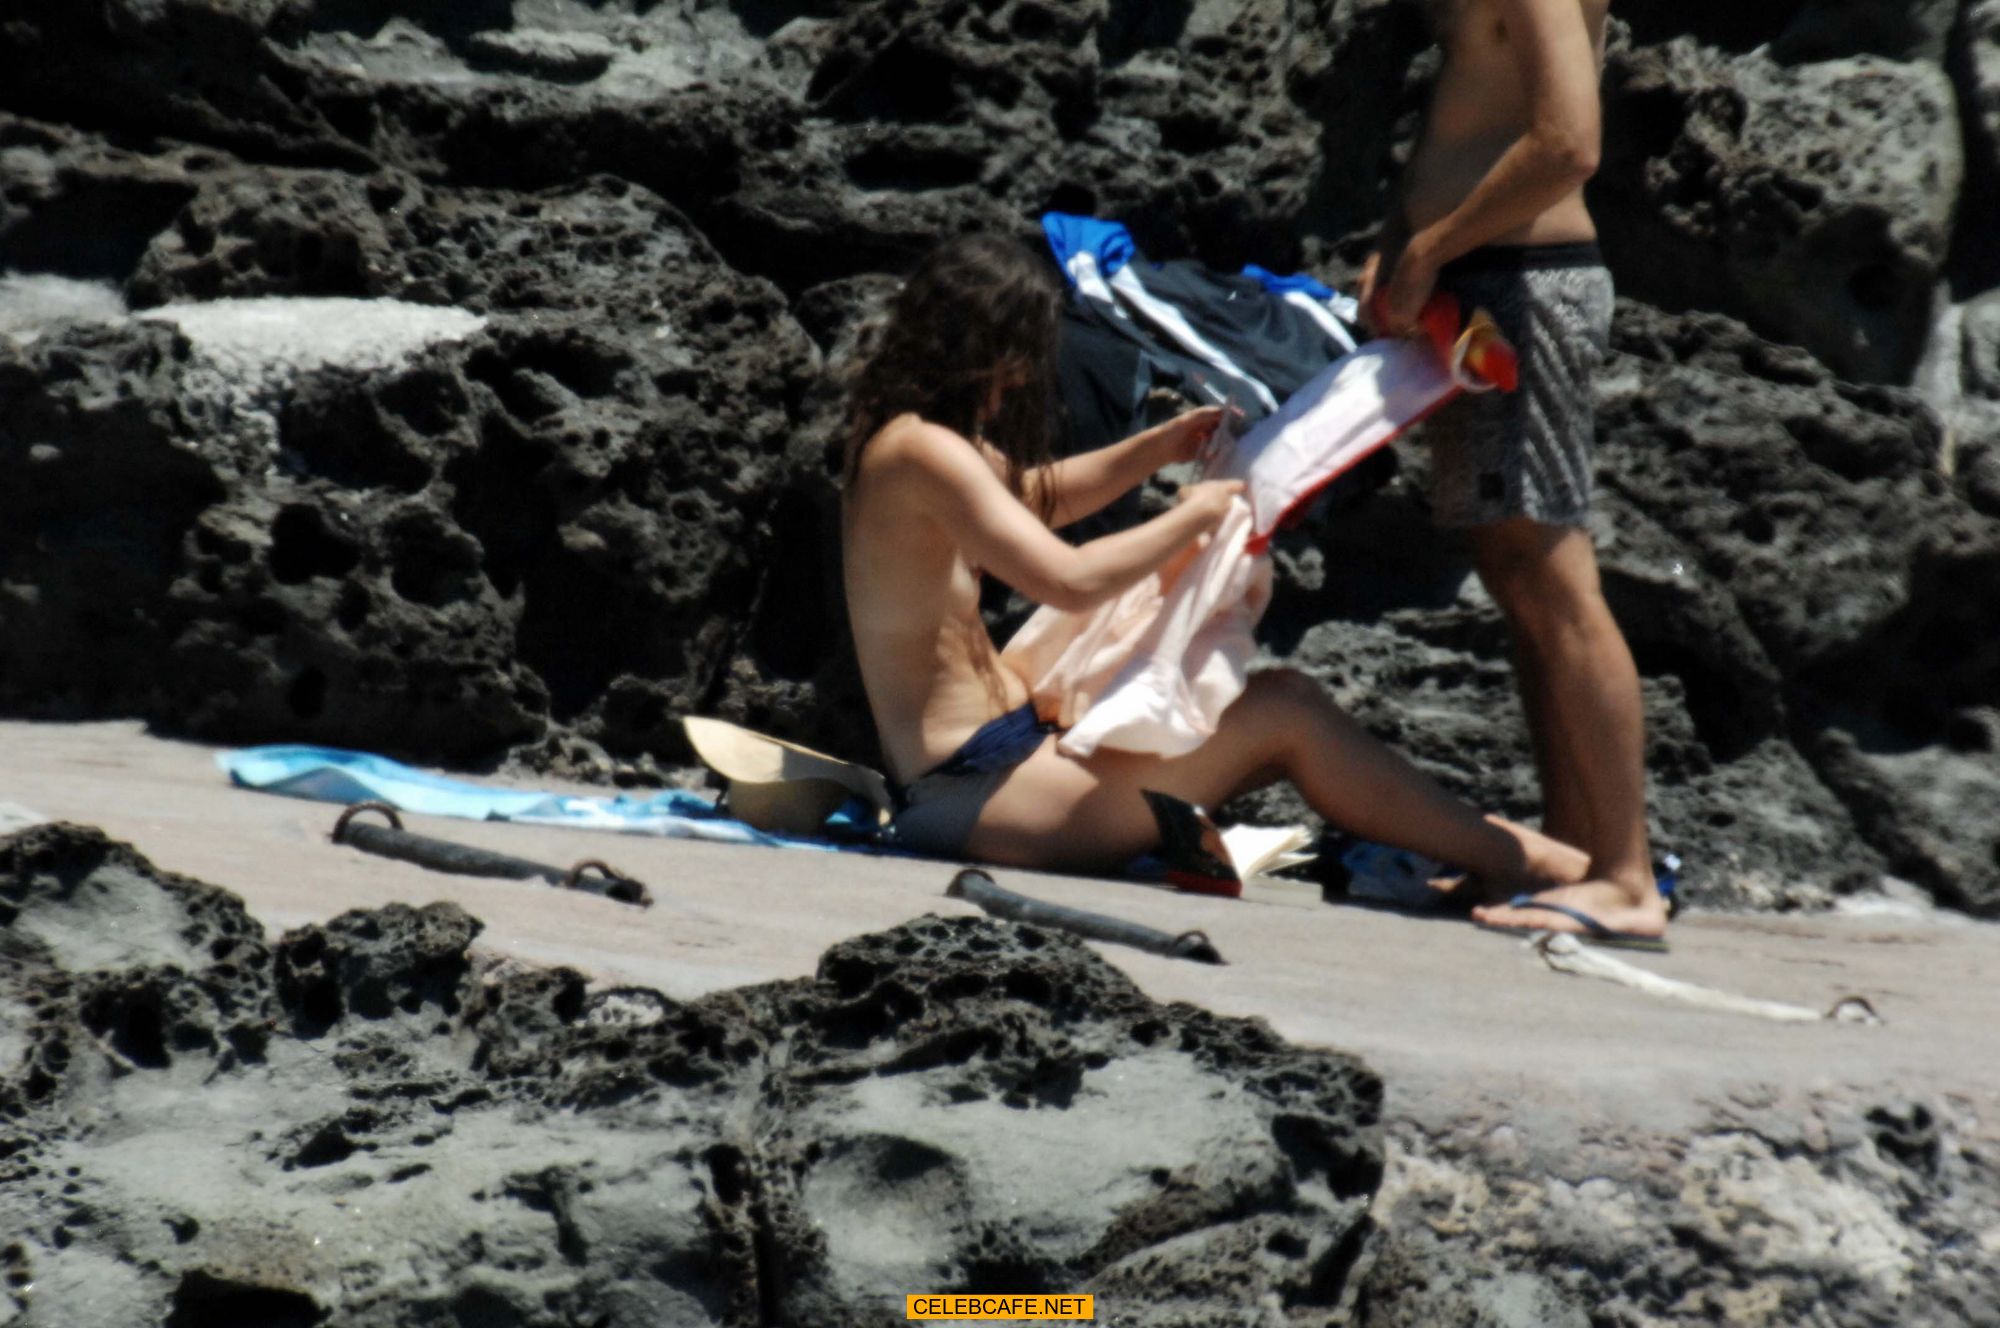 keira_knightley_on_the_beach_in_pantelleria_some_topless_62918_20.jpg